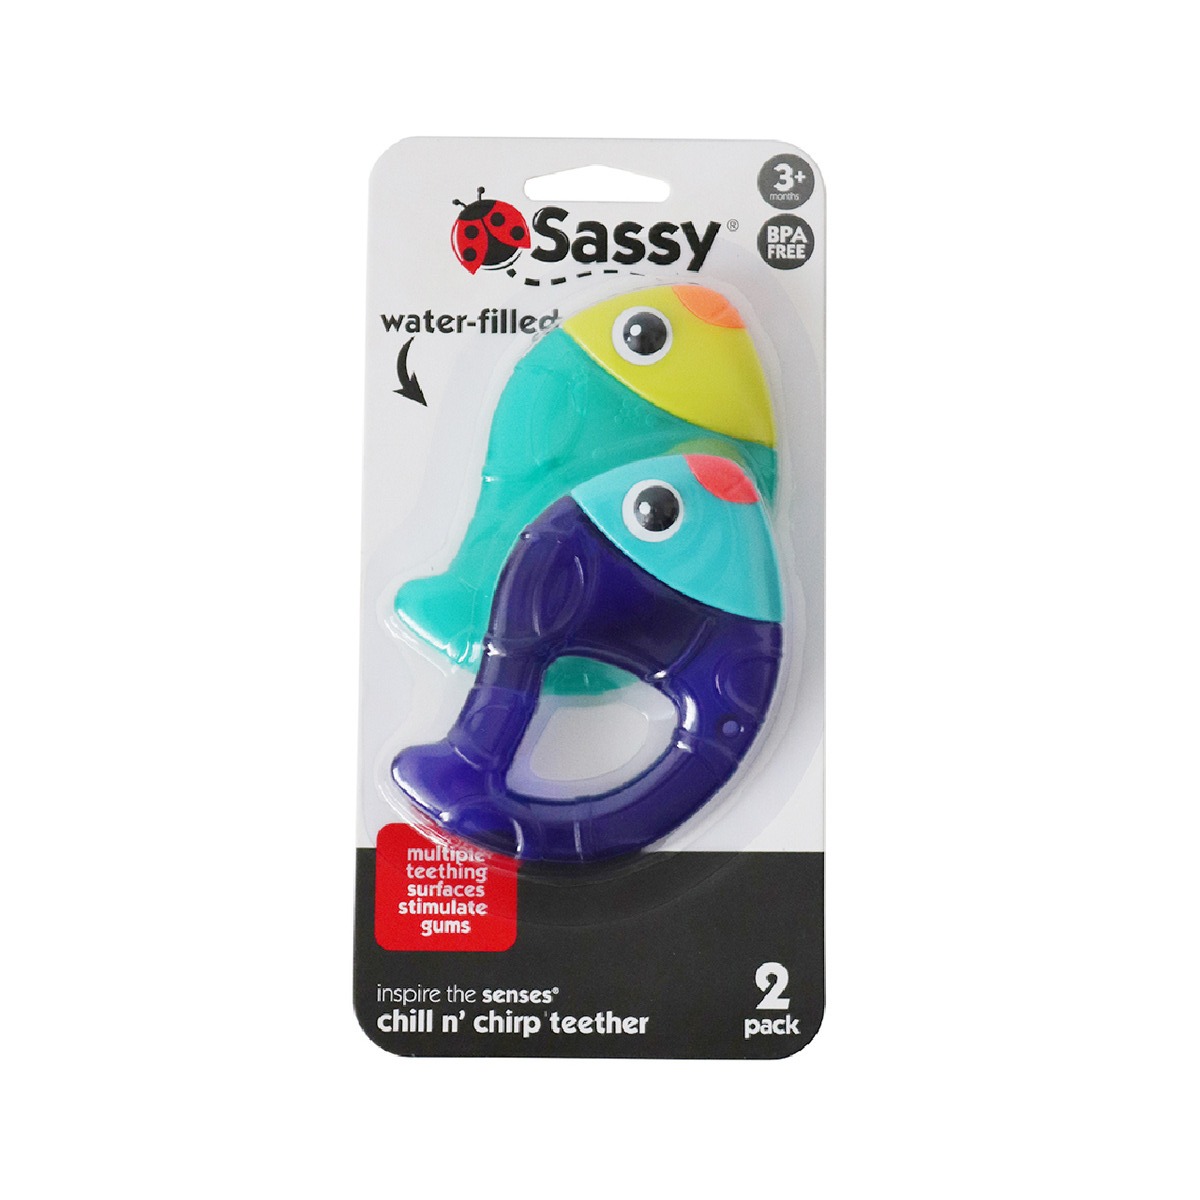 Sassy Chill N' Chirp Water Filled Teether 2 Pack